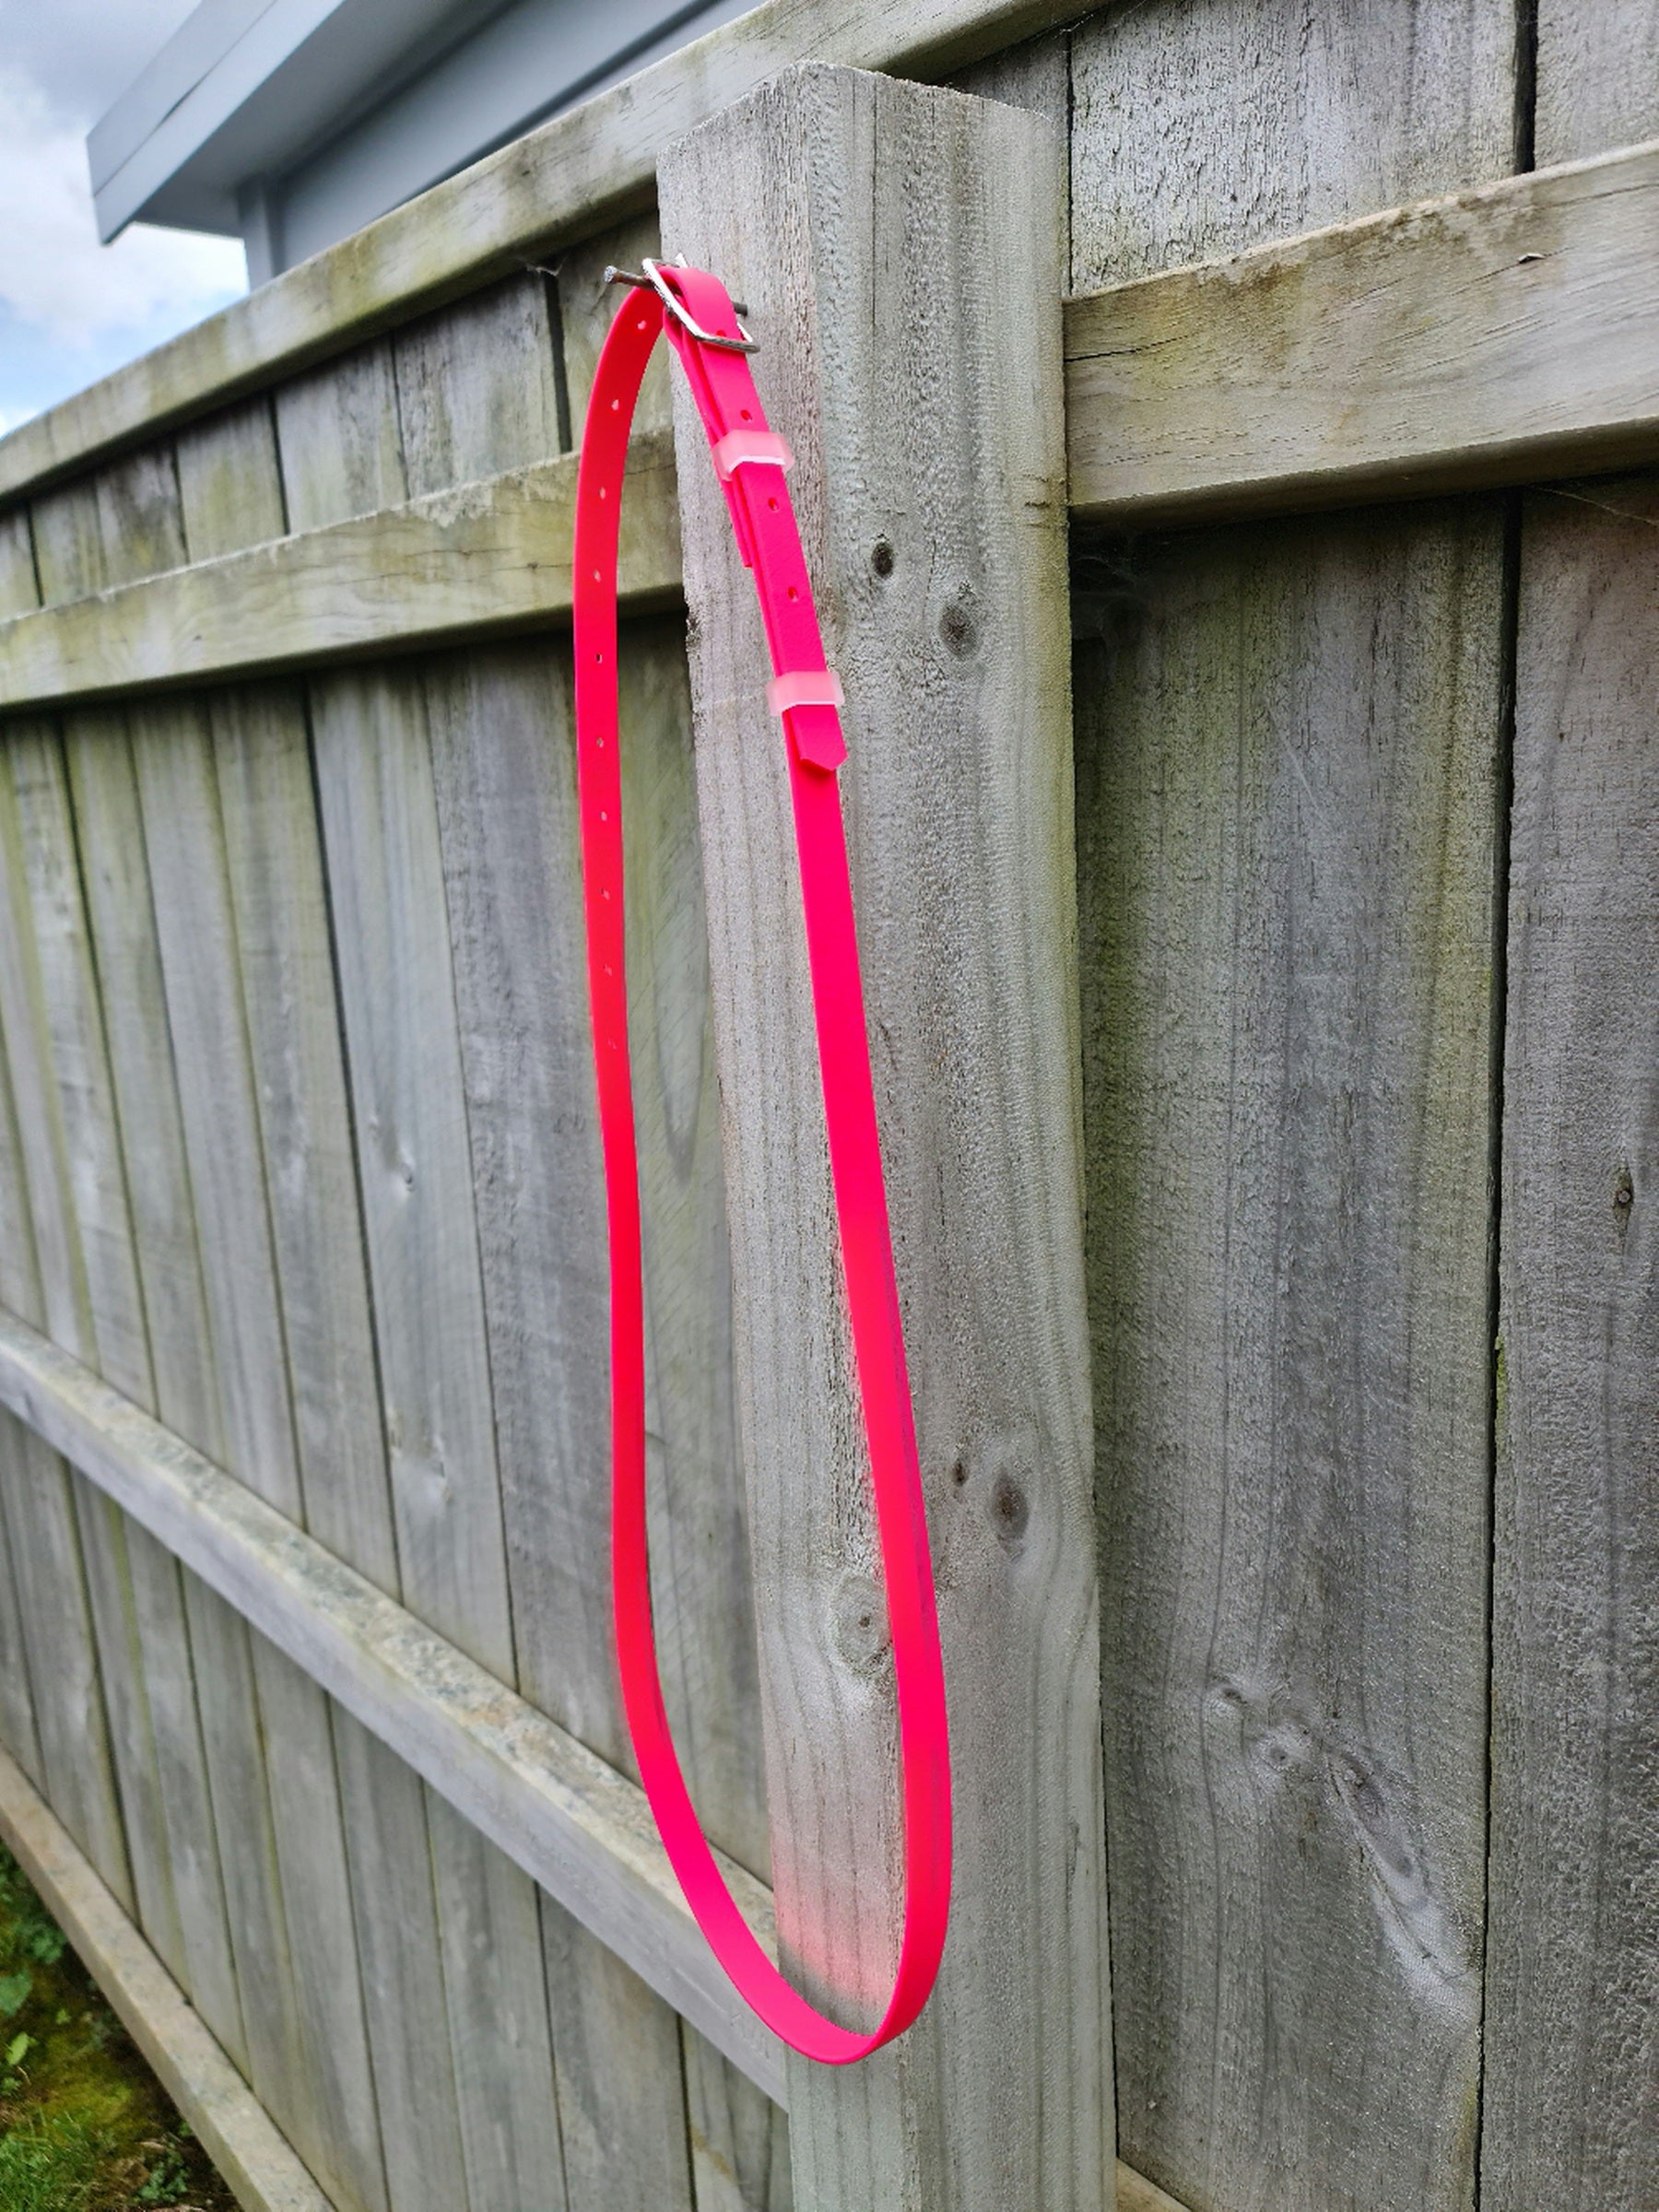 A bright pink "Oh Shoot" Neck strap by LS Equestrian hangs from the top of a wooden fence, resembling the vibrant tack often seen on bridles. The neck strap is long and loops back around itself, with the buckle visible at the top. The background features a portion of the fence and a grassy area below.